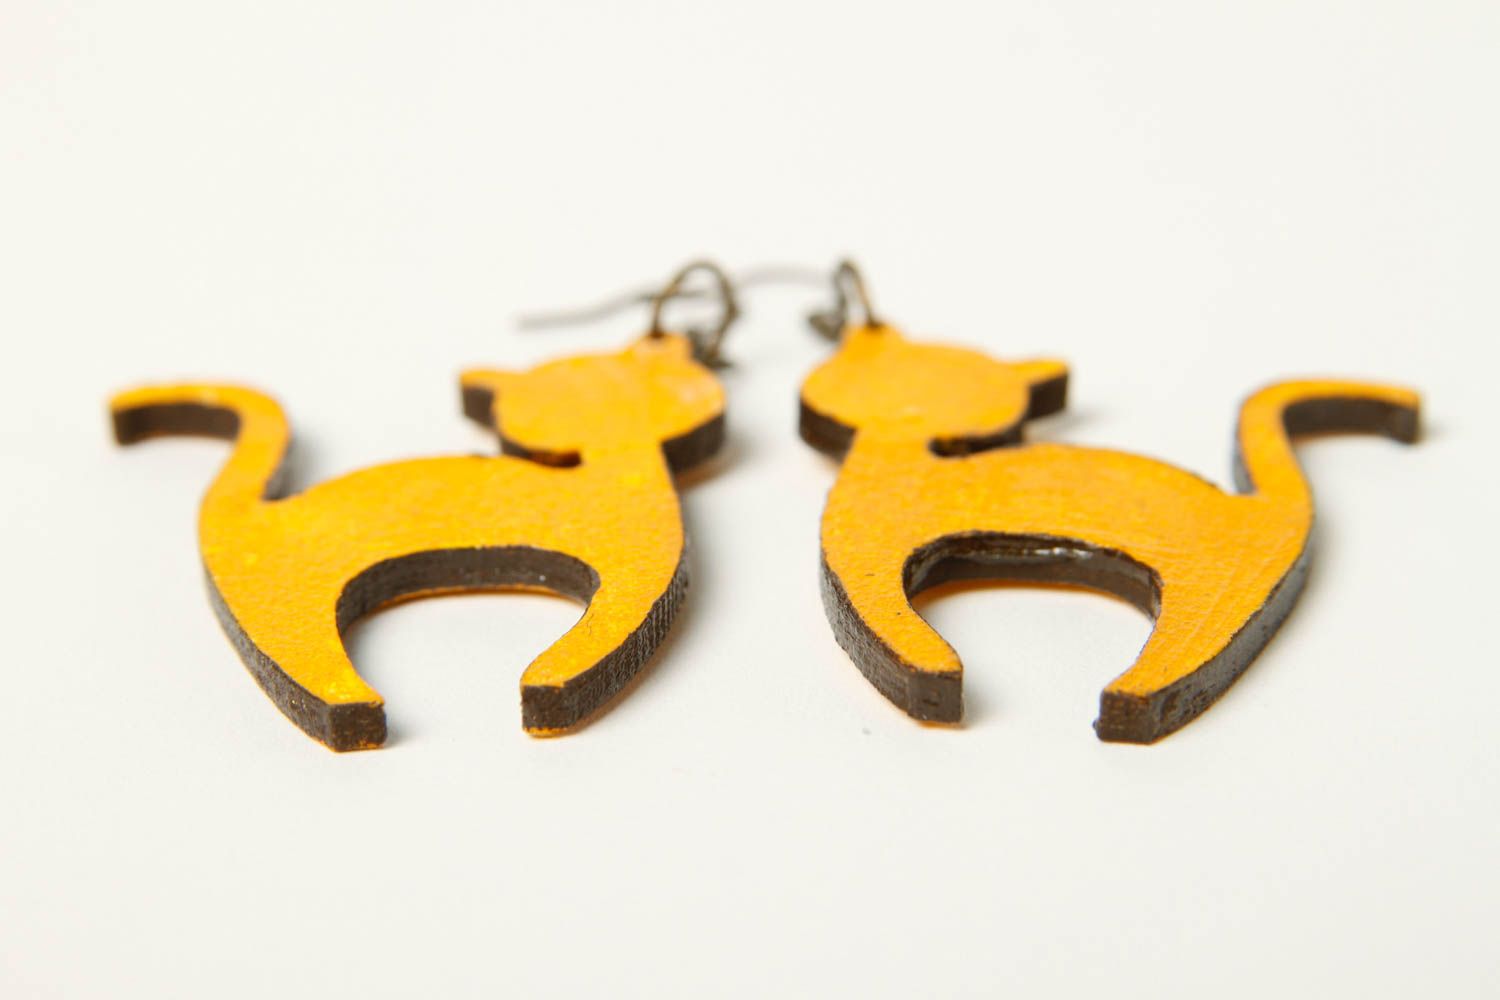 Fashionable handmade earrings wooden accessories perfect gift stylish jewelry photo 4